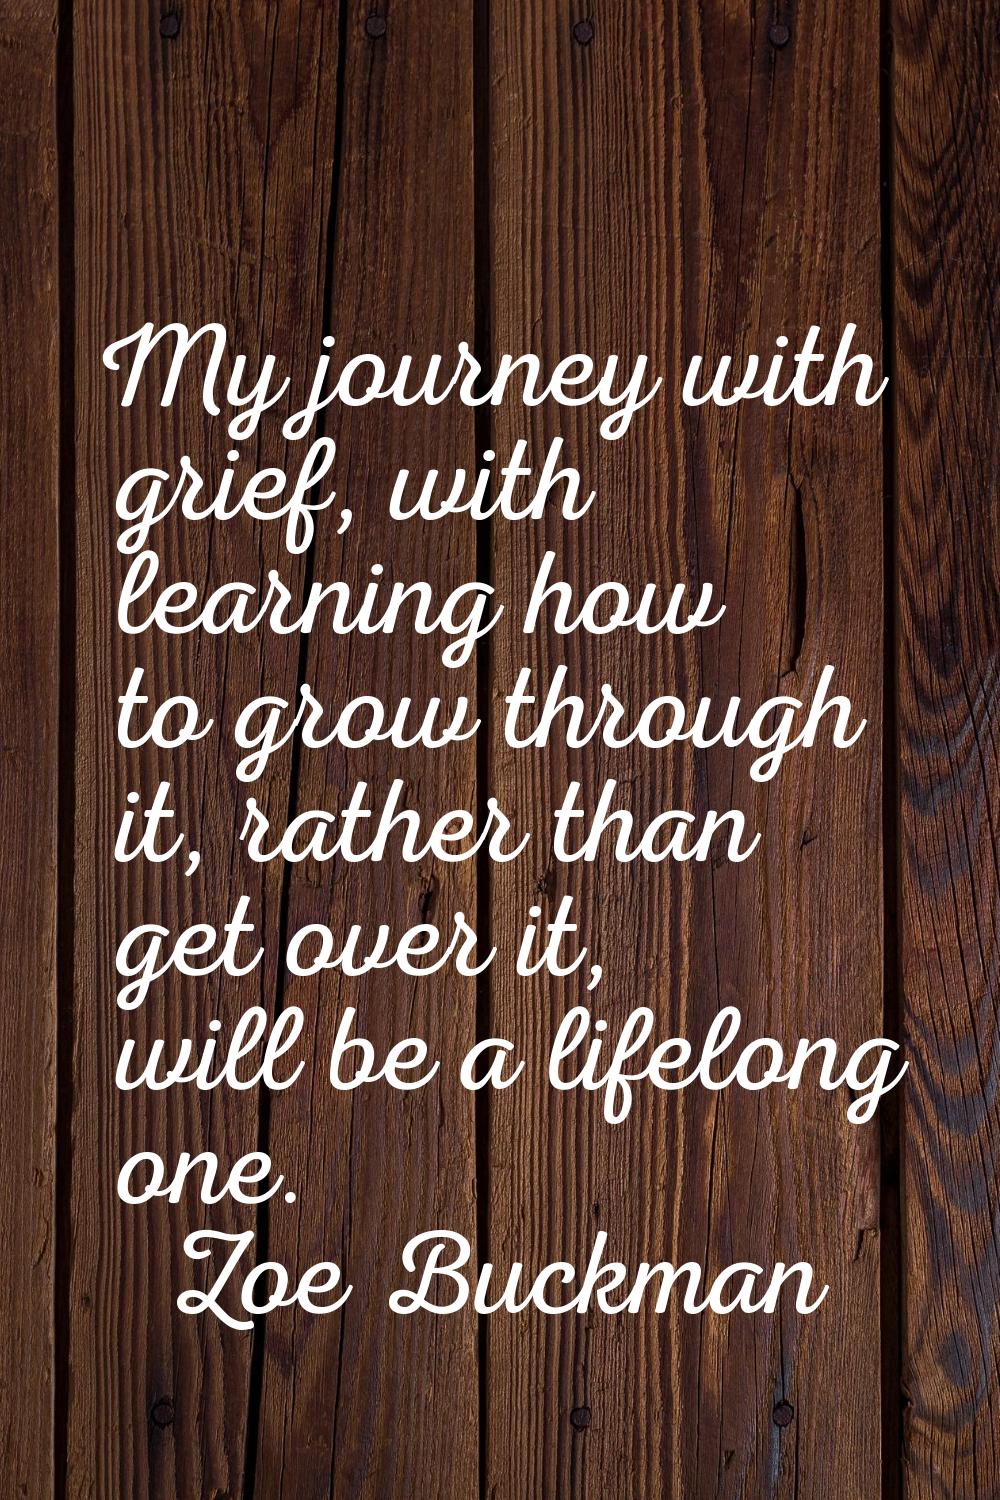 My journey with grief, with learning how to grow through it, rather than get over it, will be a lif